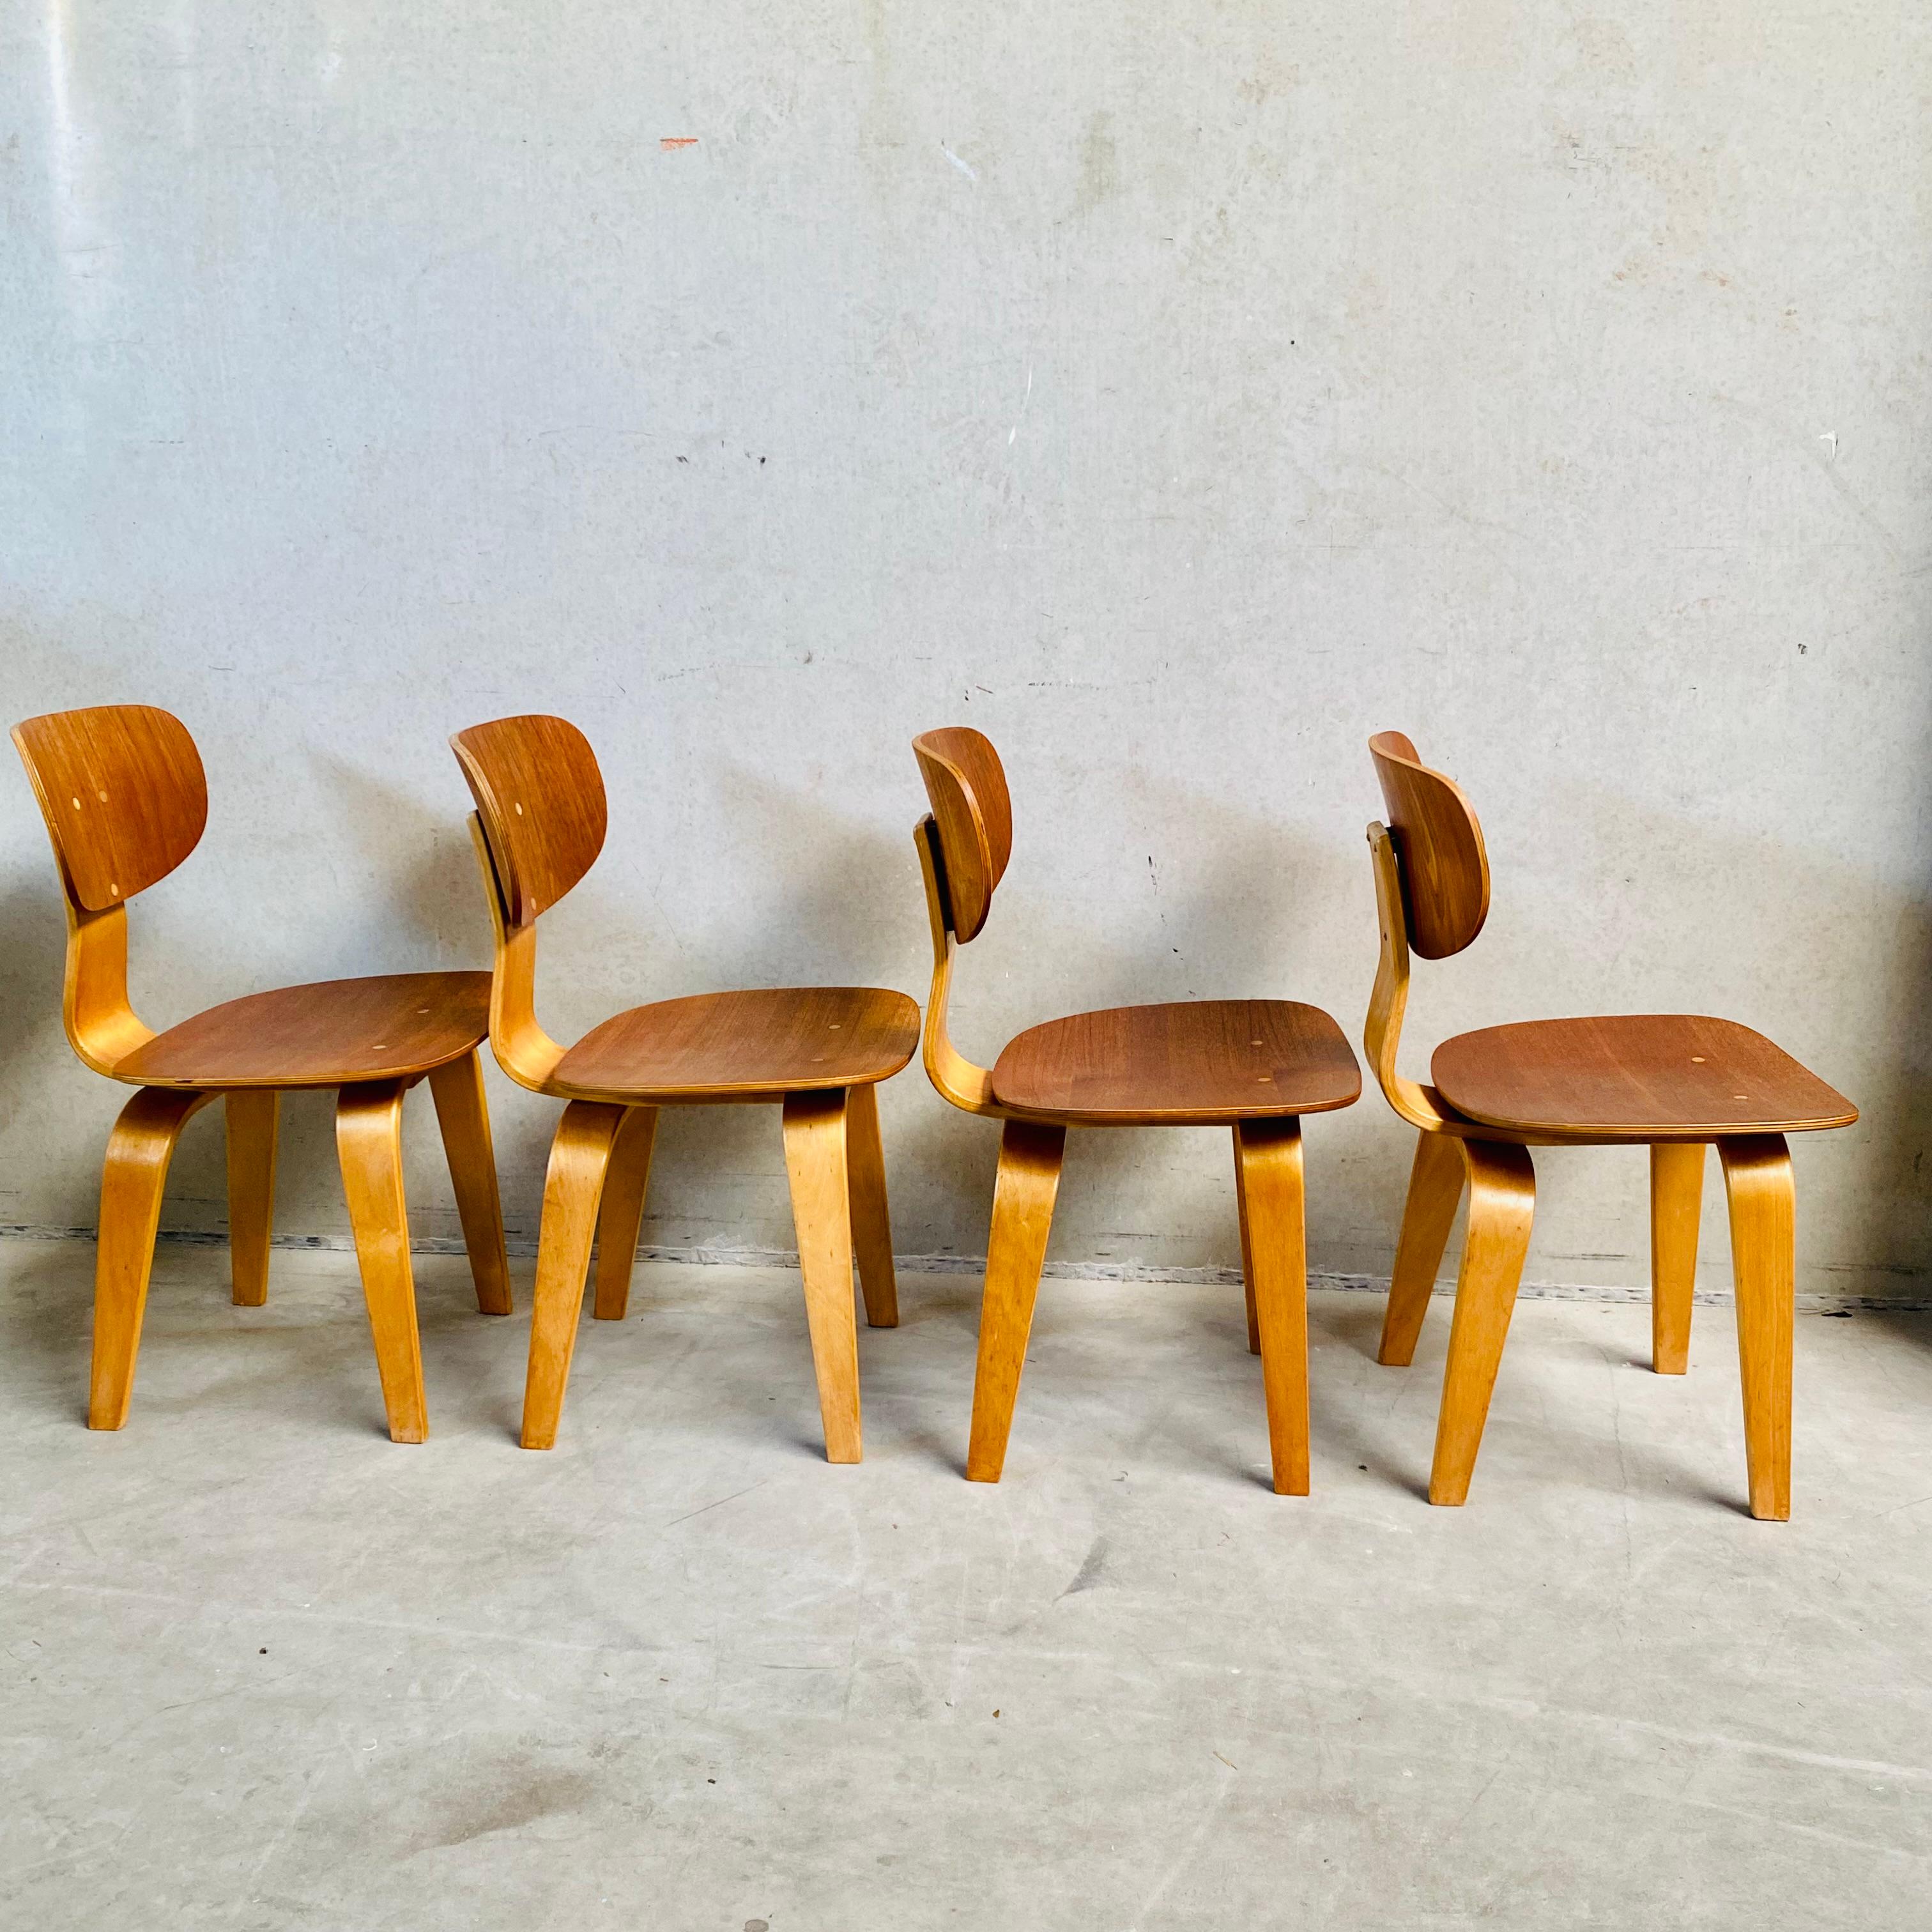 Dutch 4 x Pastoe SB02 Dining Chairs by Cees Braakman Netherlands 1950 For Sale